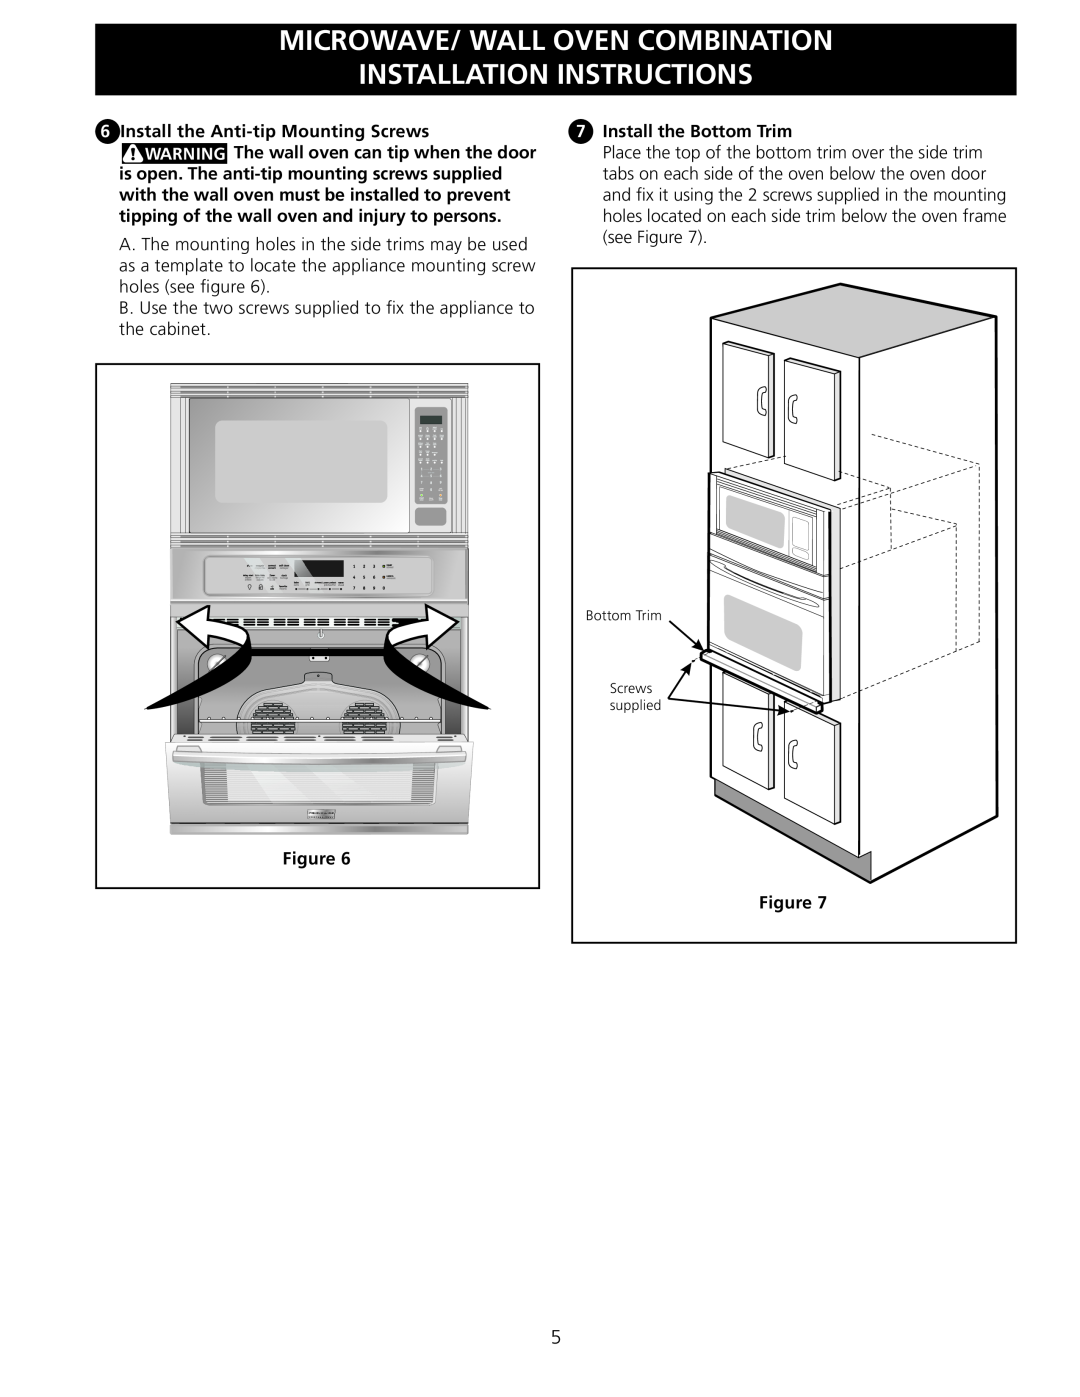 Frigidaire 318201534 Microwave/ Wall Oven Combination Installation Instructions, Install the Anti-tip Mounting Screws 